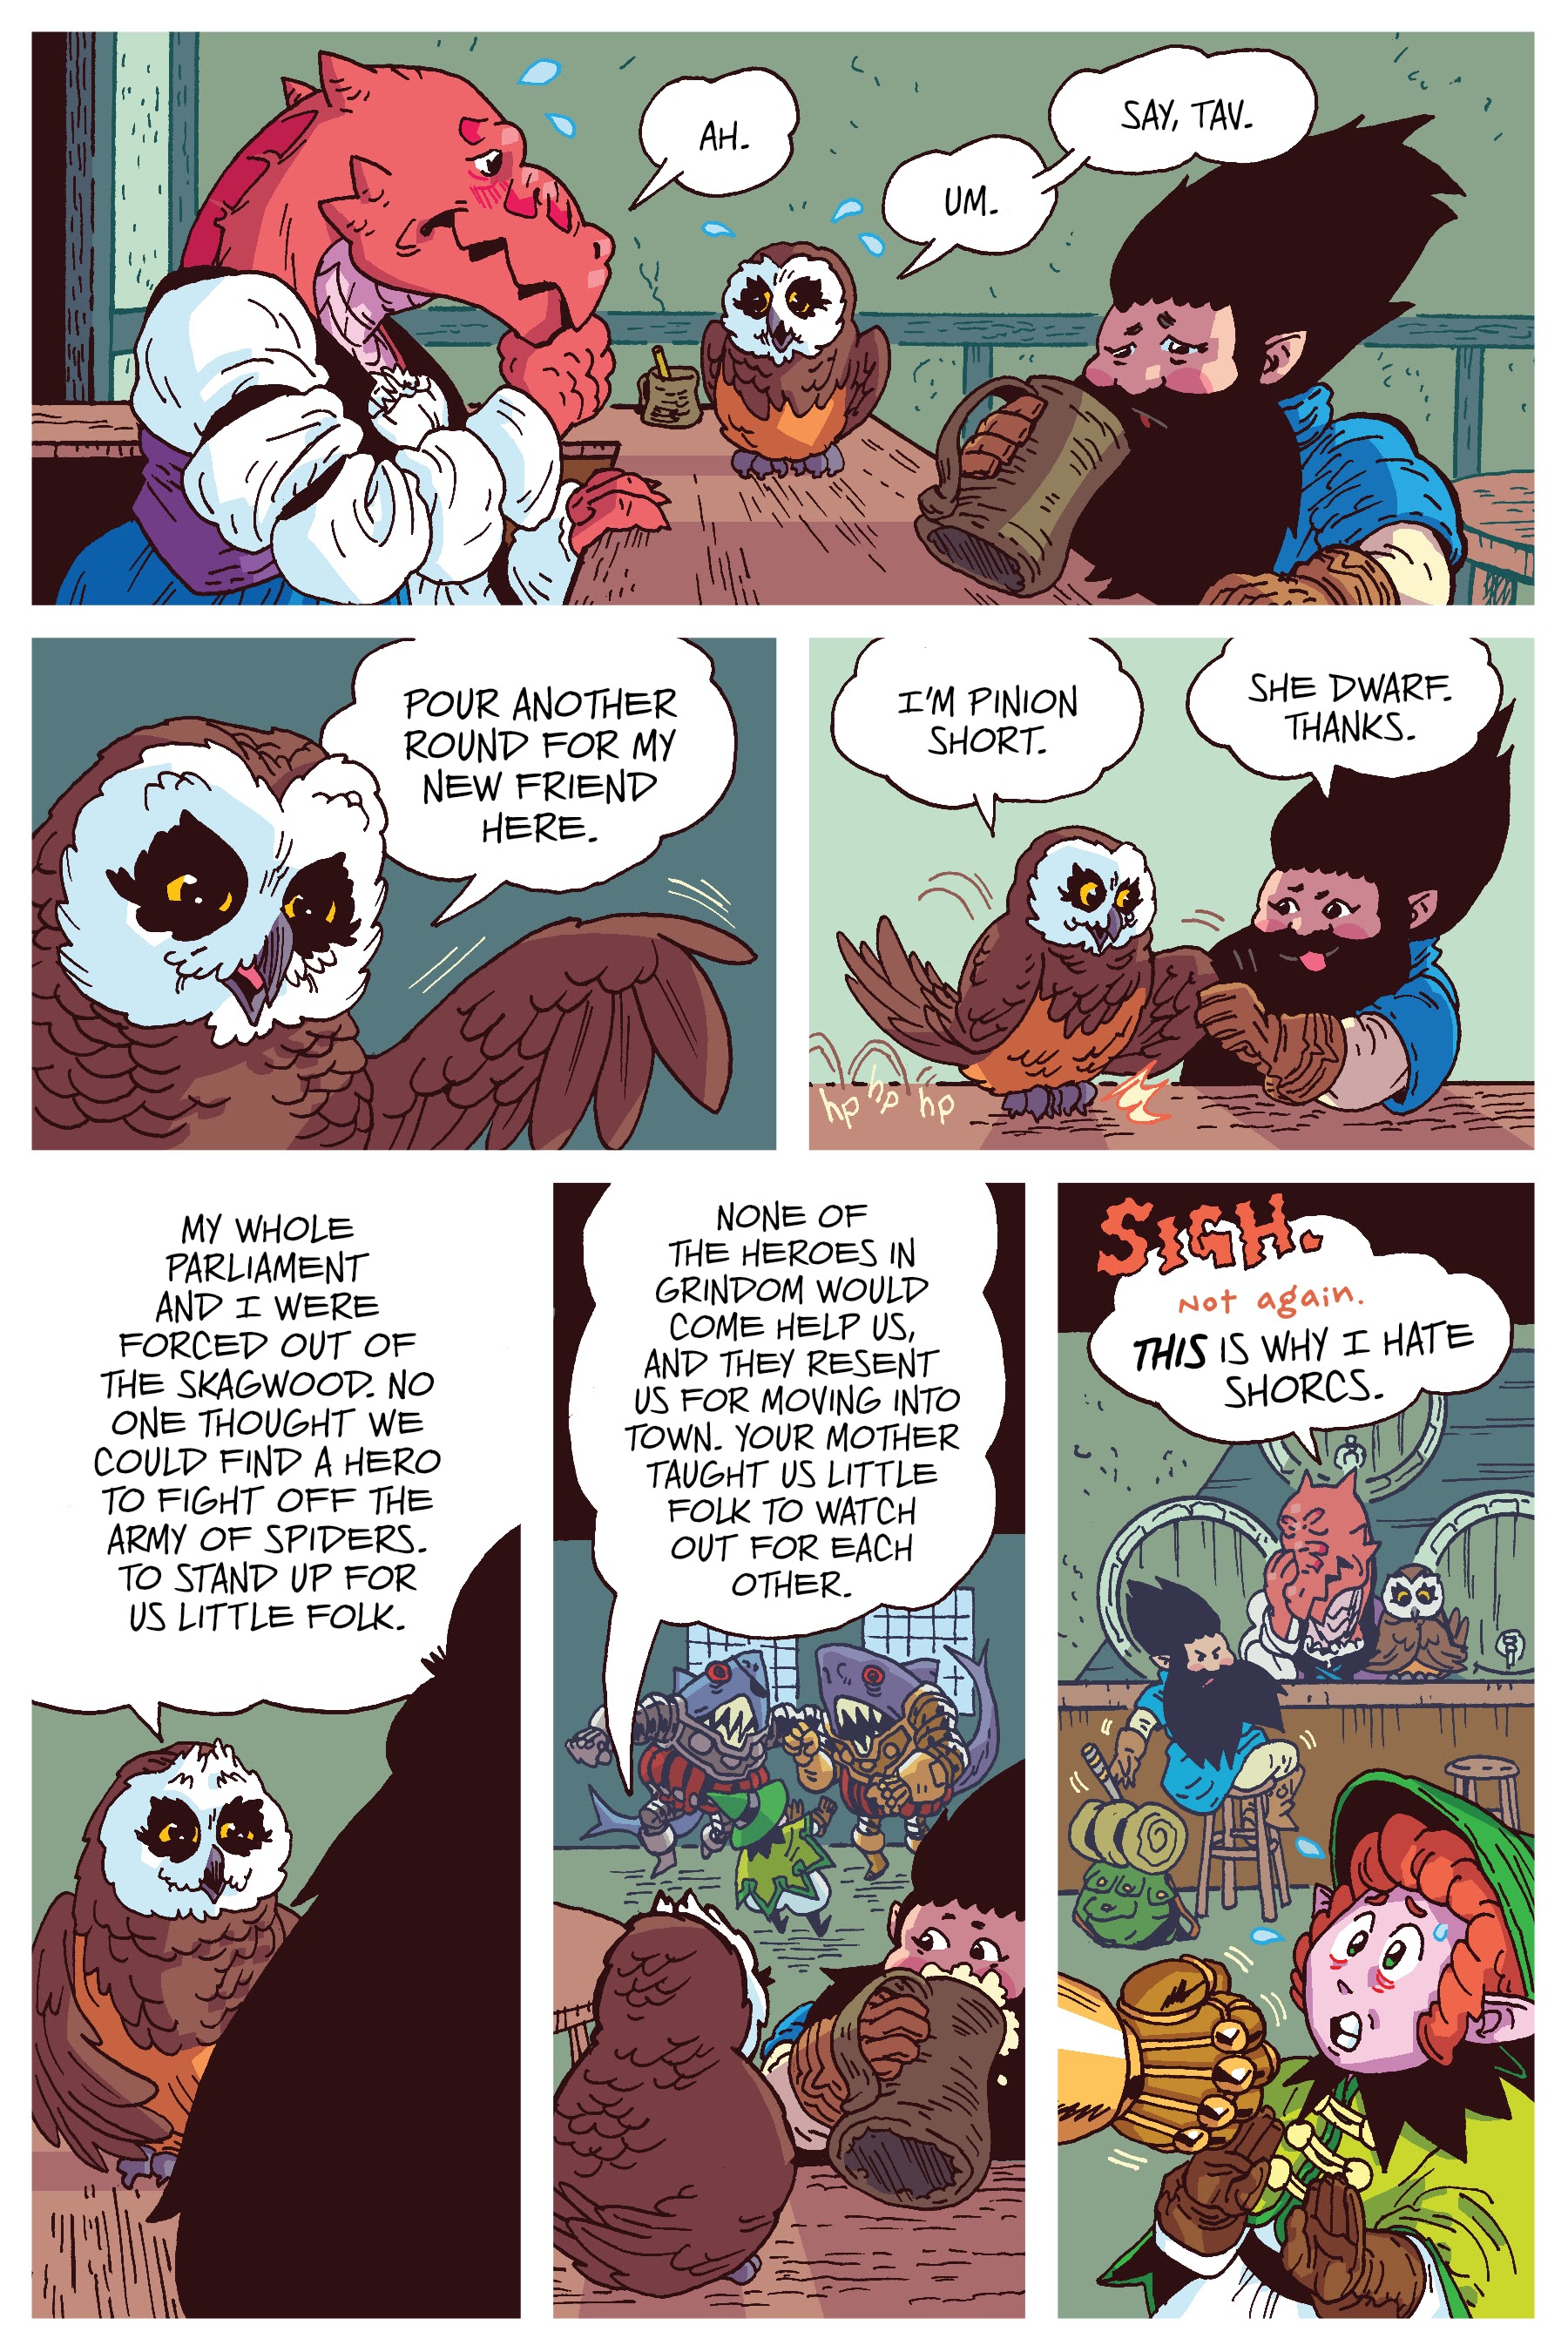 Read online The Savage Beard of She Dwarf comic -  Issue # TPB (Part 1) - 14